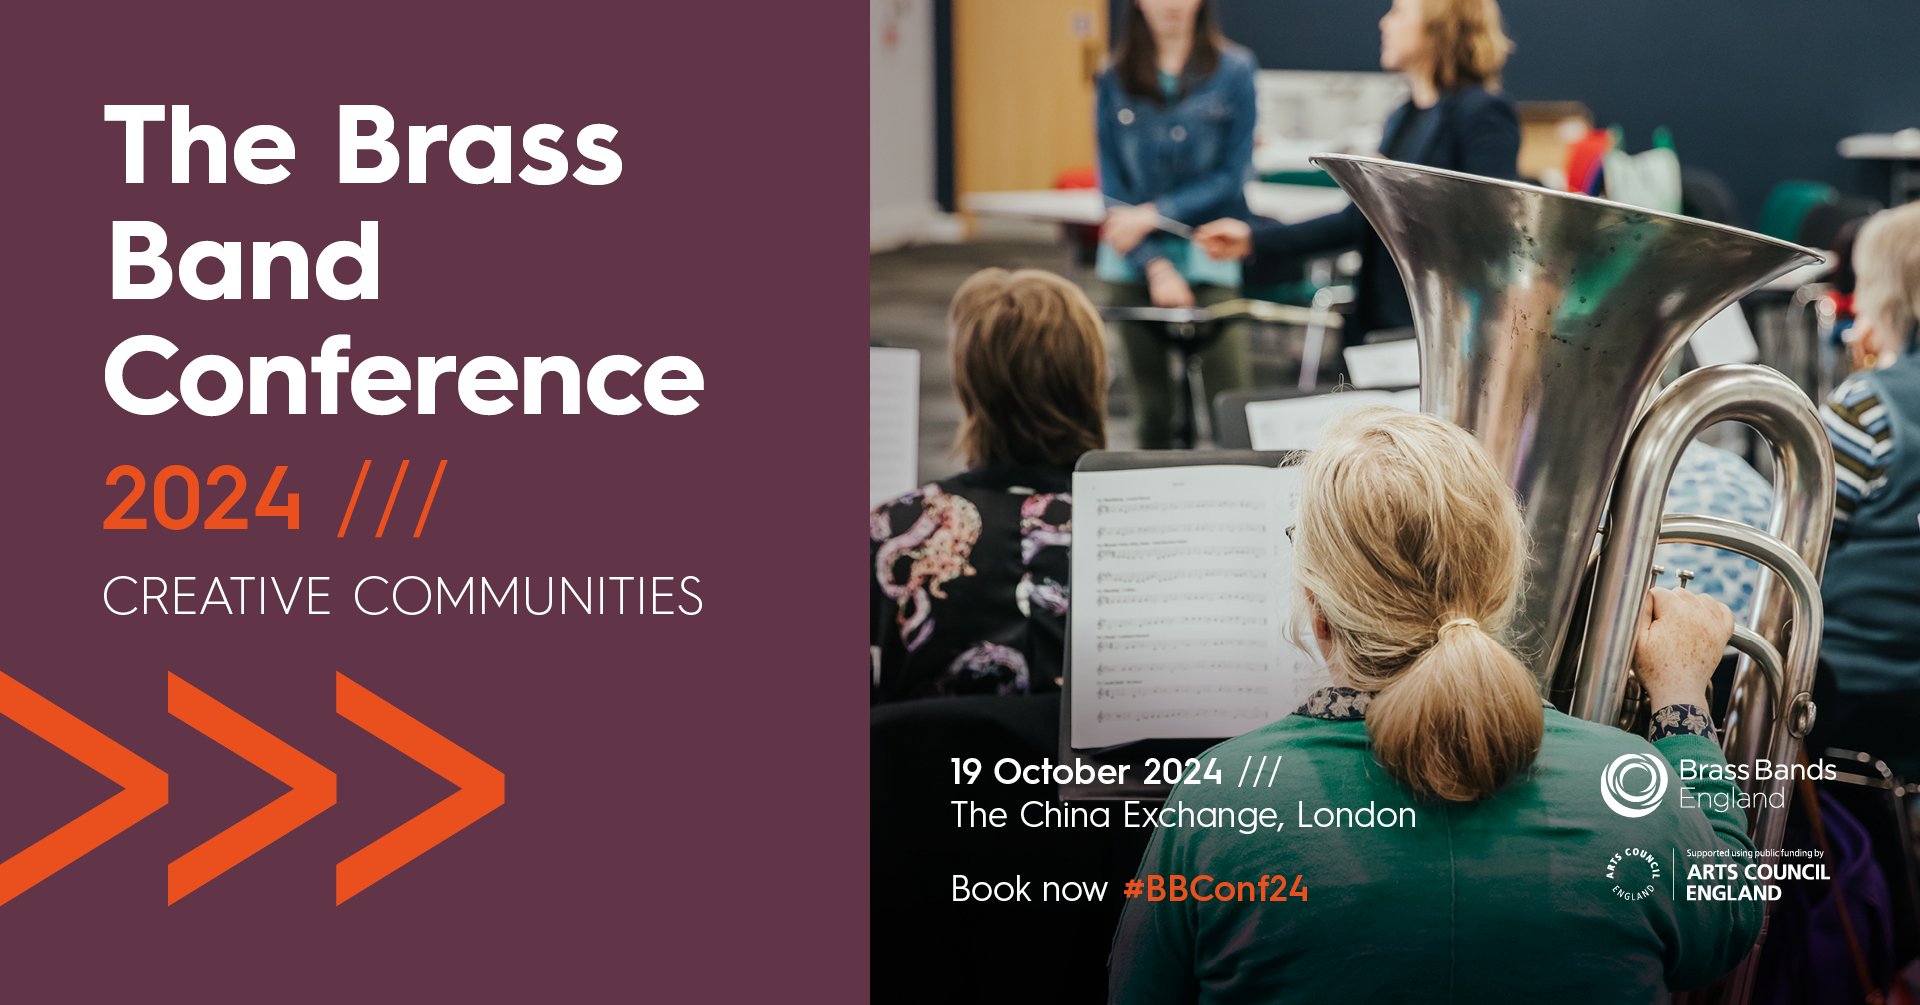 Tickets for the Brass Band Conference are now on sale!
